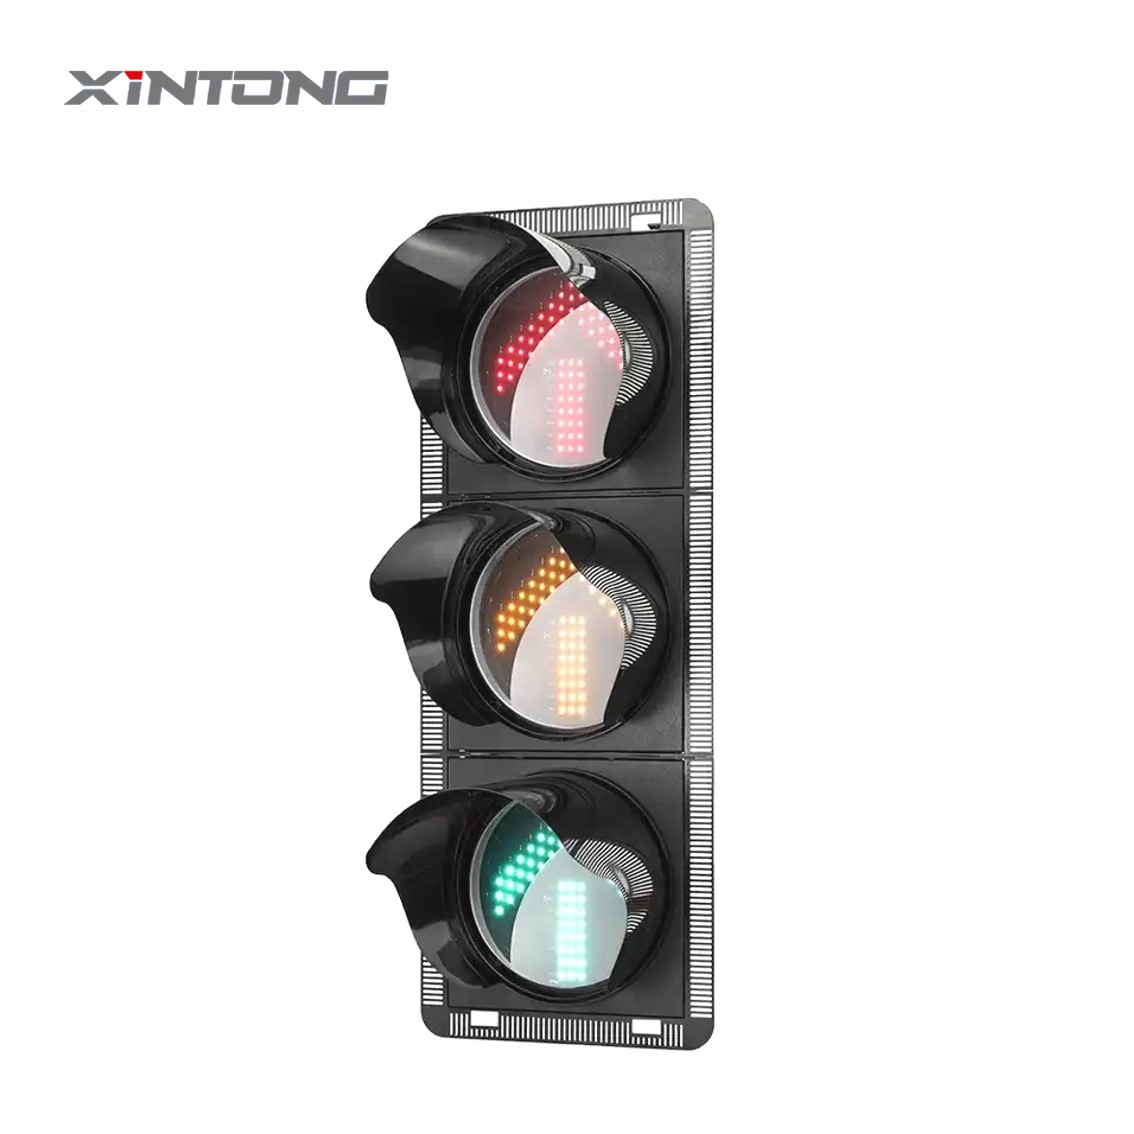 Three color LED warning traffic light factory manufacture price 1